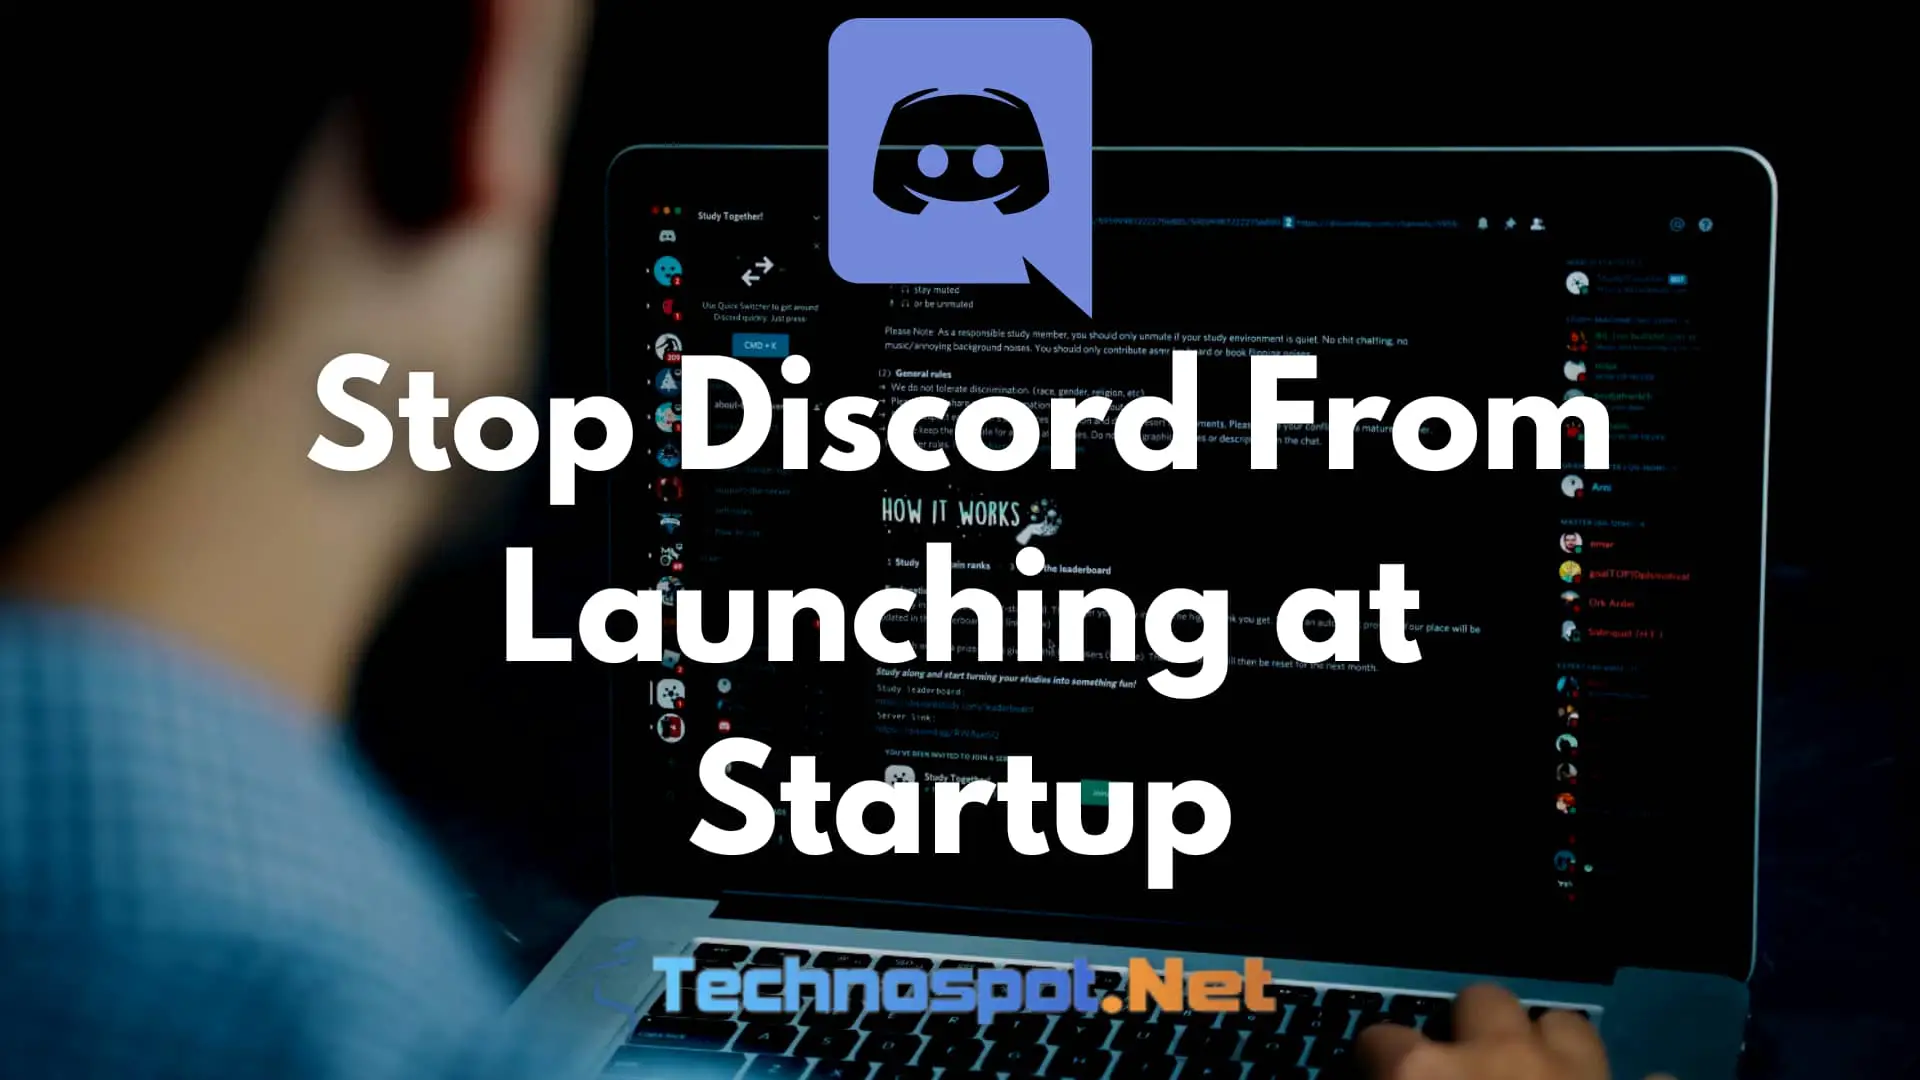 How To Stop Discord From Launching at Startup in Windows?